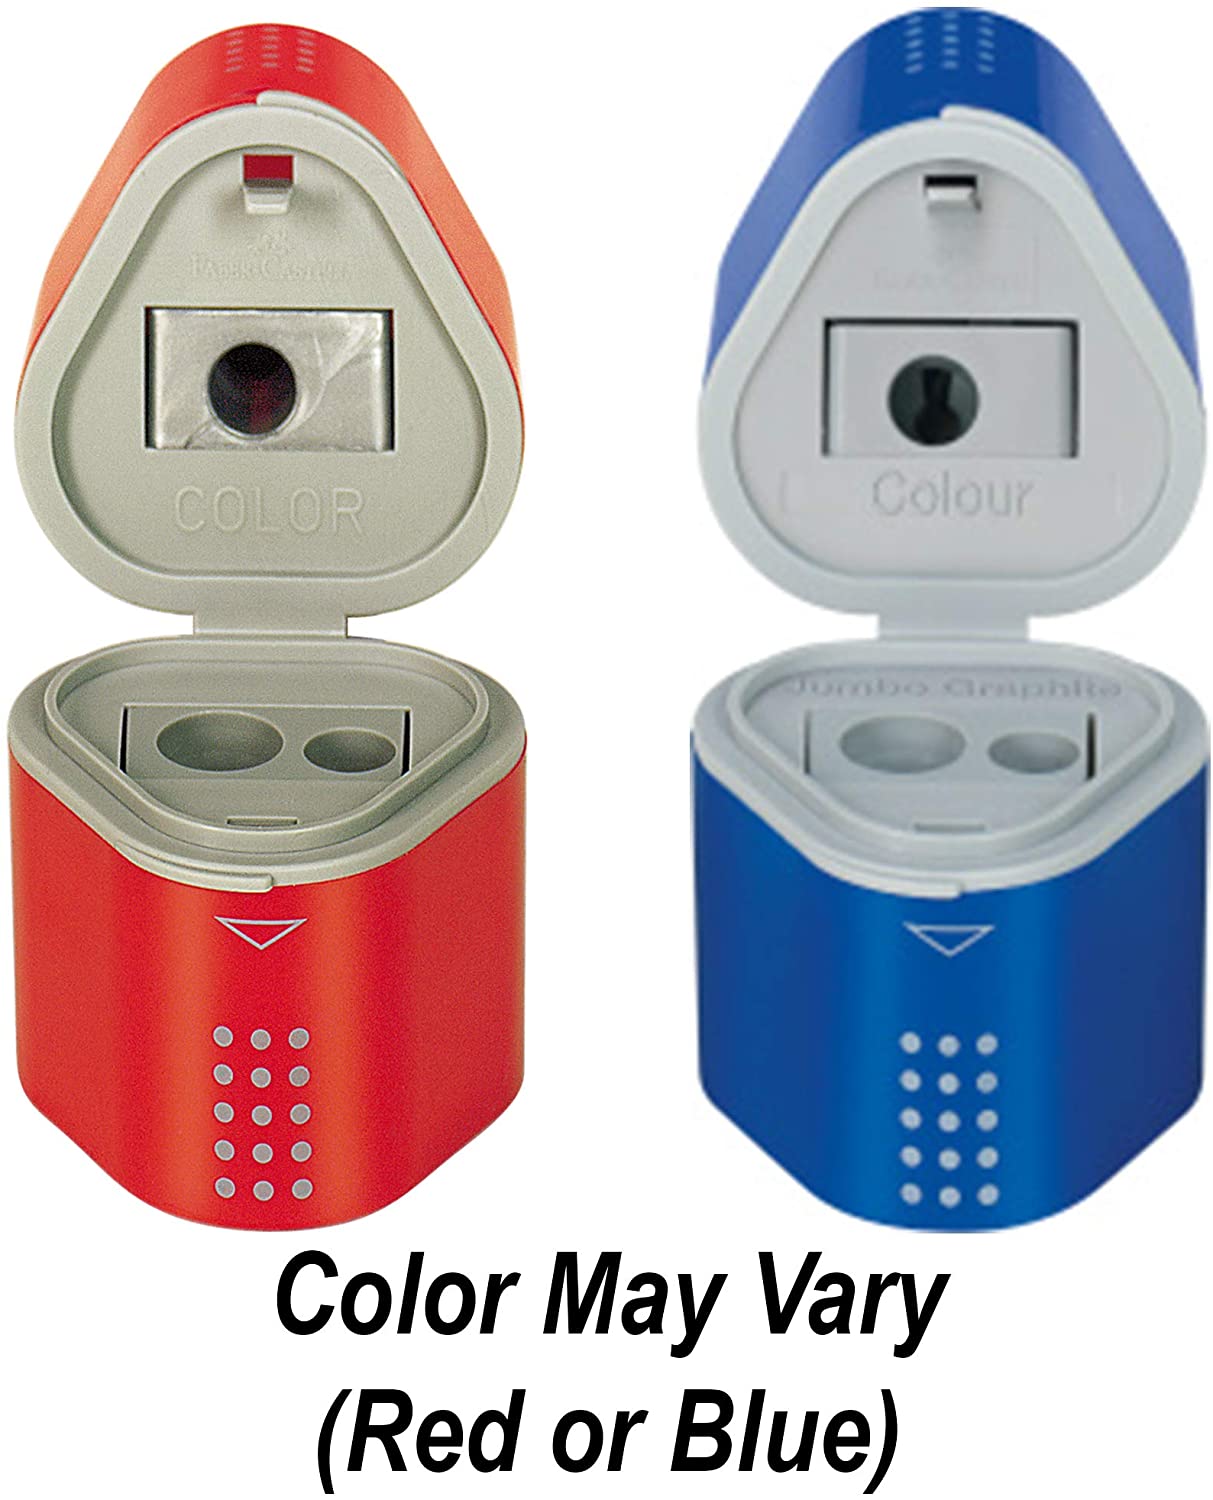 GRIP Trio Pencil sharpener – Imaginuity Play with a Purpose